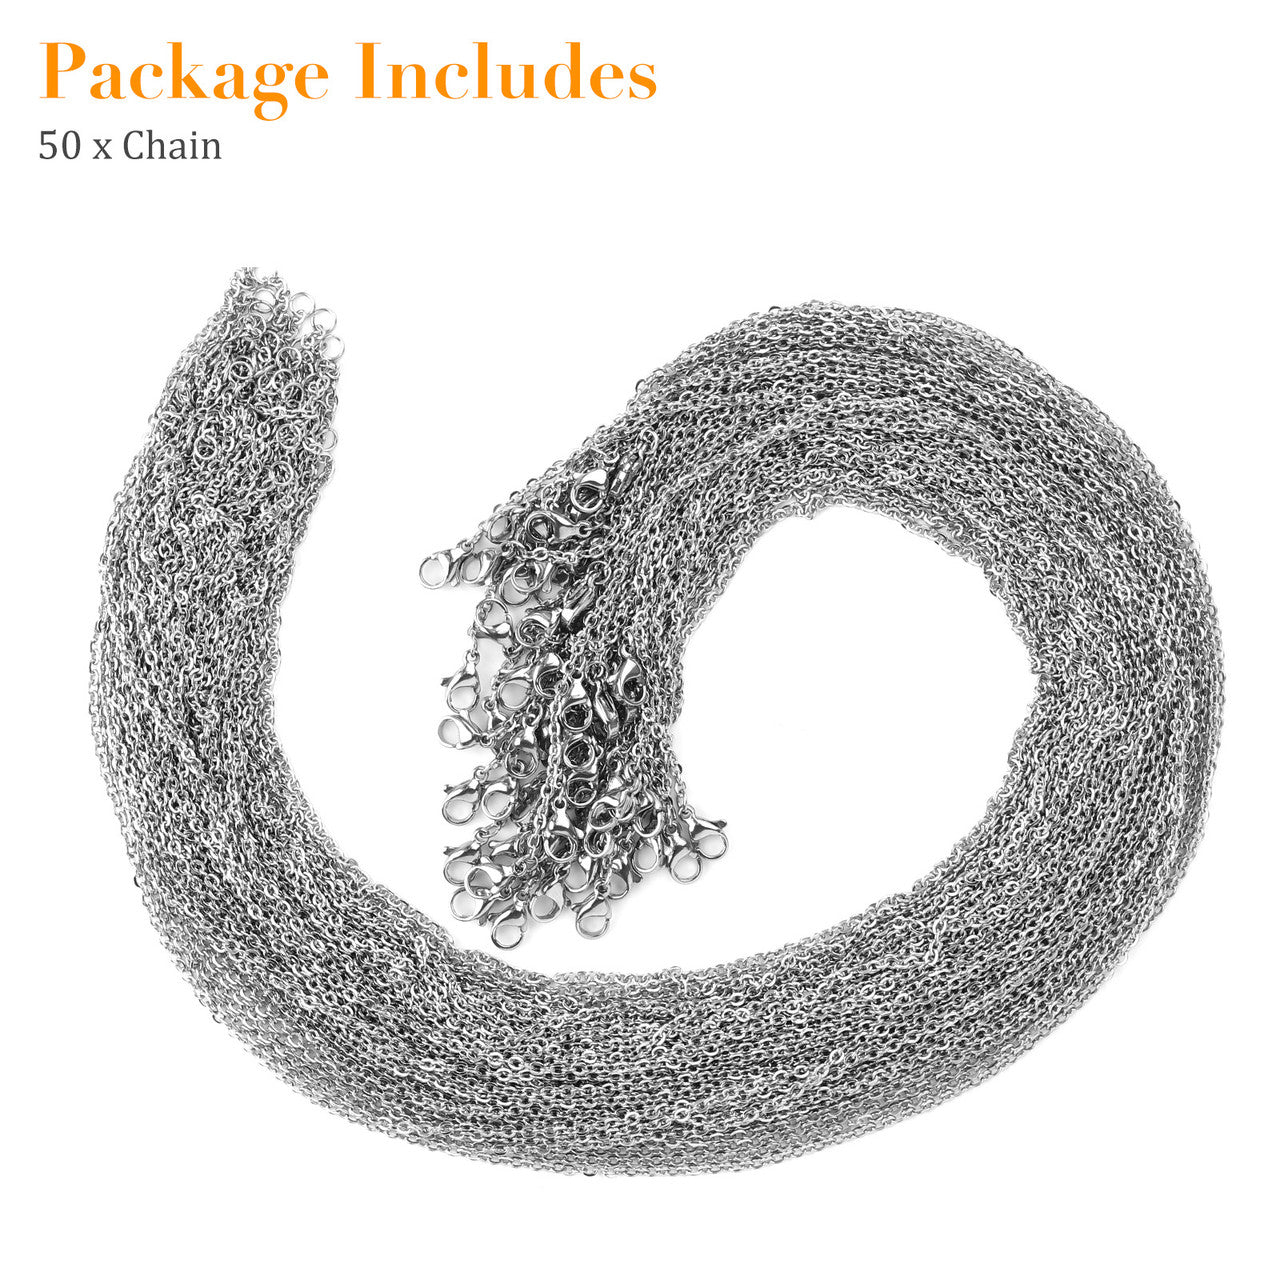 50 Packs Stainless Chain Necklace - 2MM Stainless Steel Link Cable Chain Necklace Bulk for DIY Jewelry Making Supplies Silver (18 Inches)